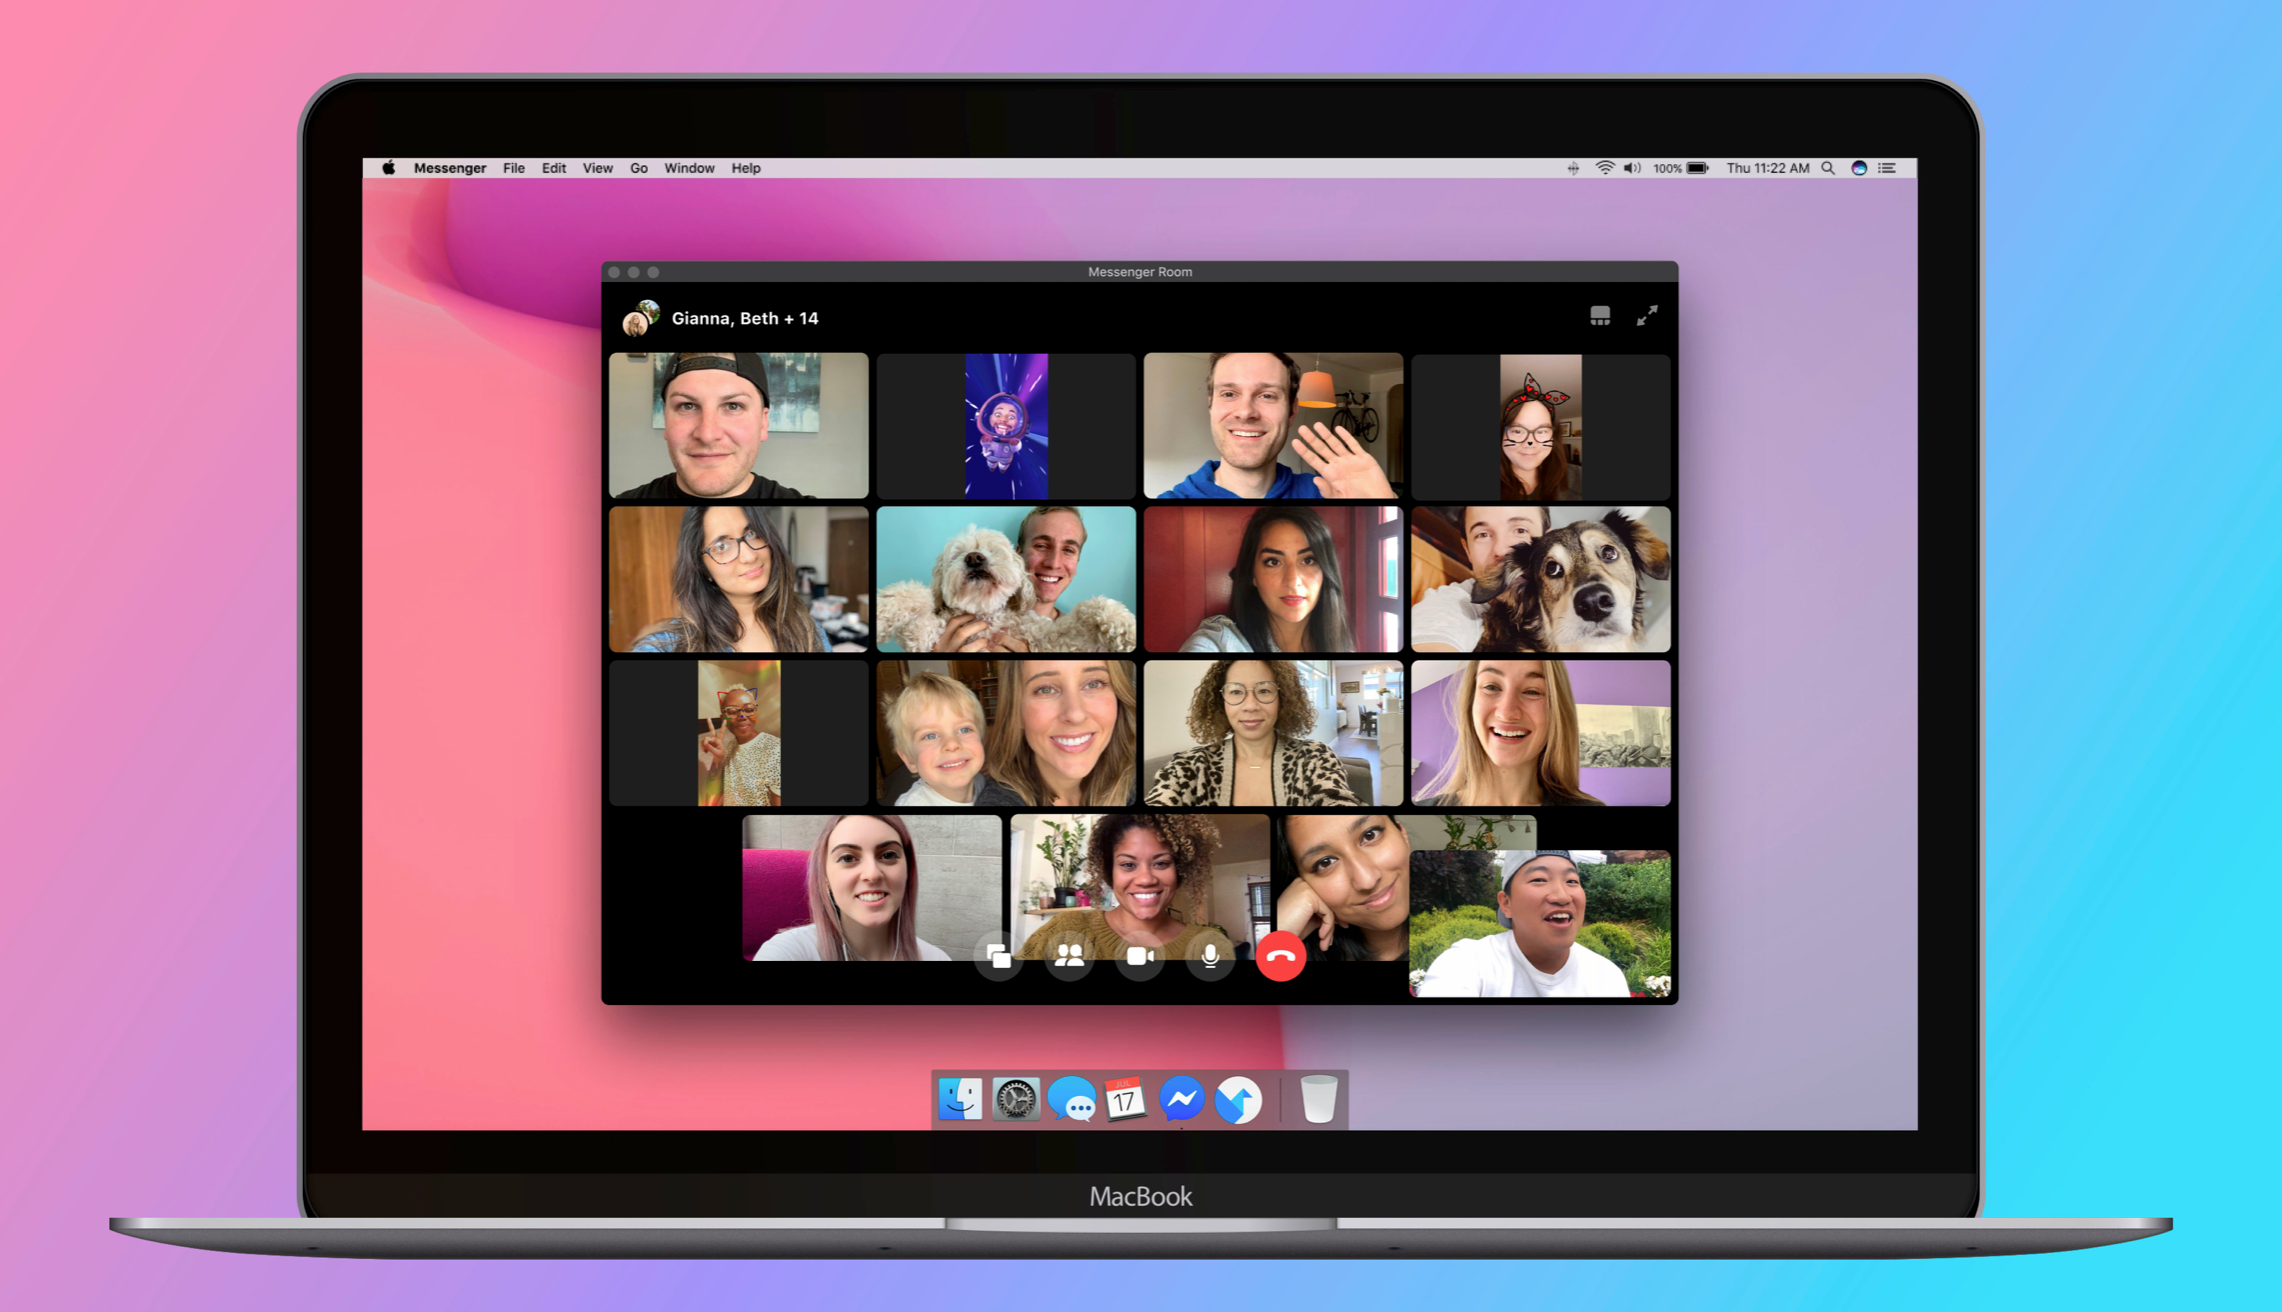 A messenger room window displayed on a Macbook showing ongoing group video call